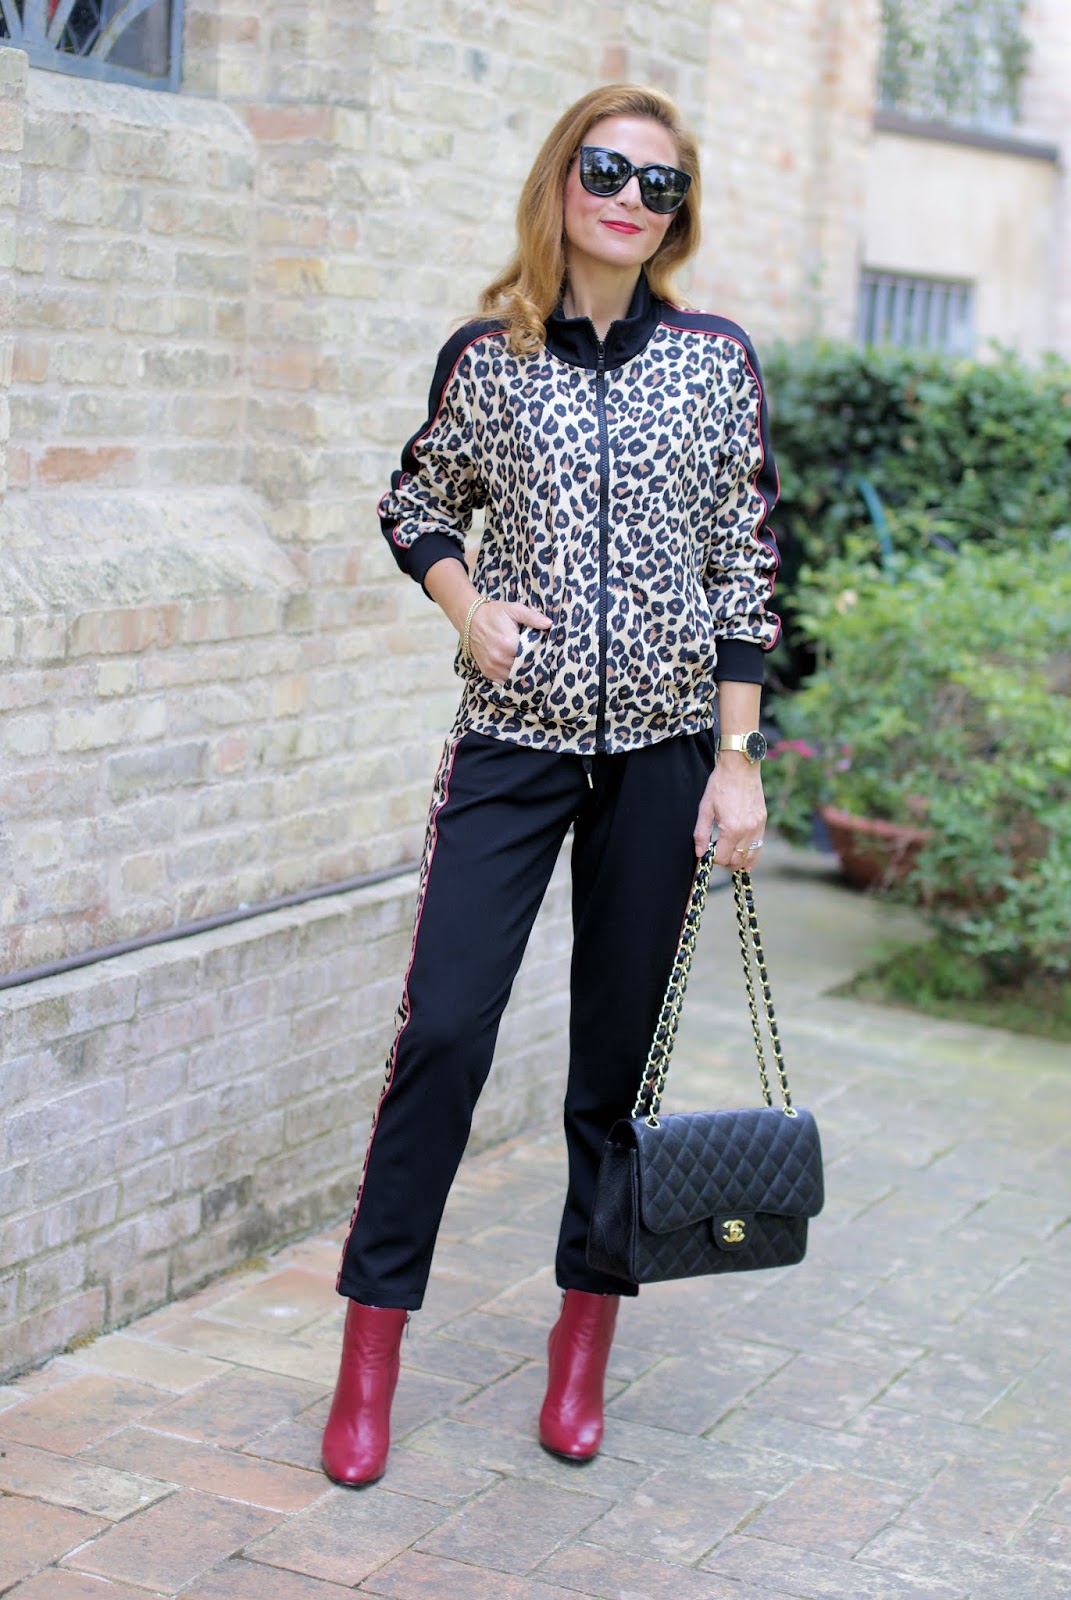 The animal print trend: leopard print tracksuit and Le Silla ankle boots on Fashion and Cookies fashion blog, fashion blogger style